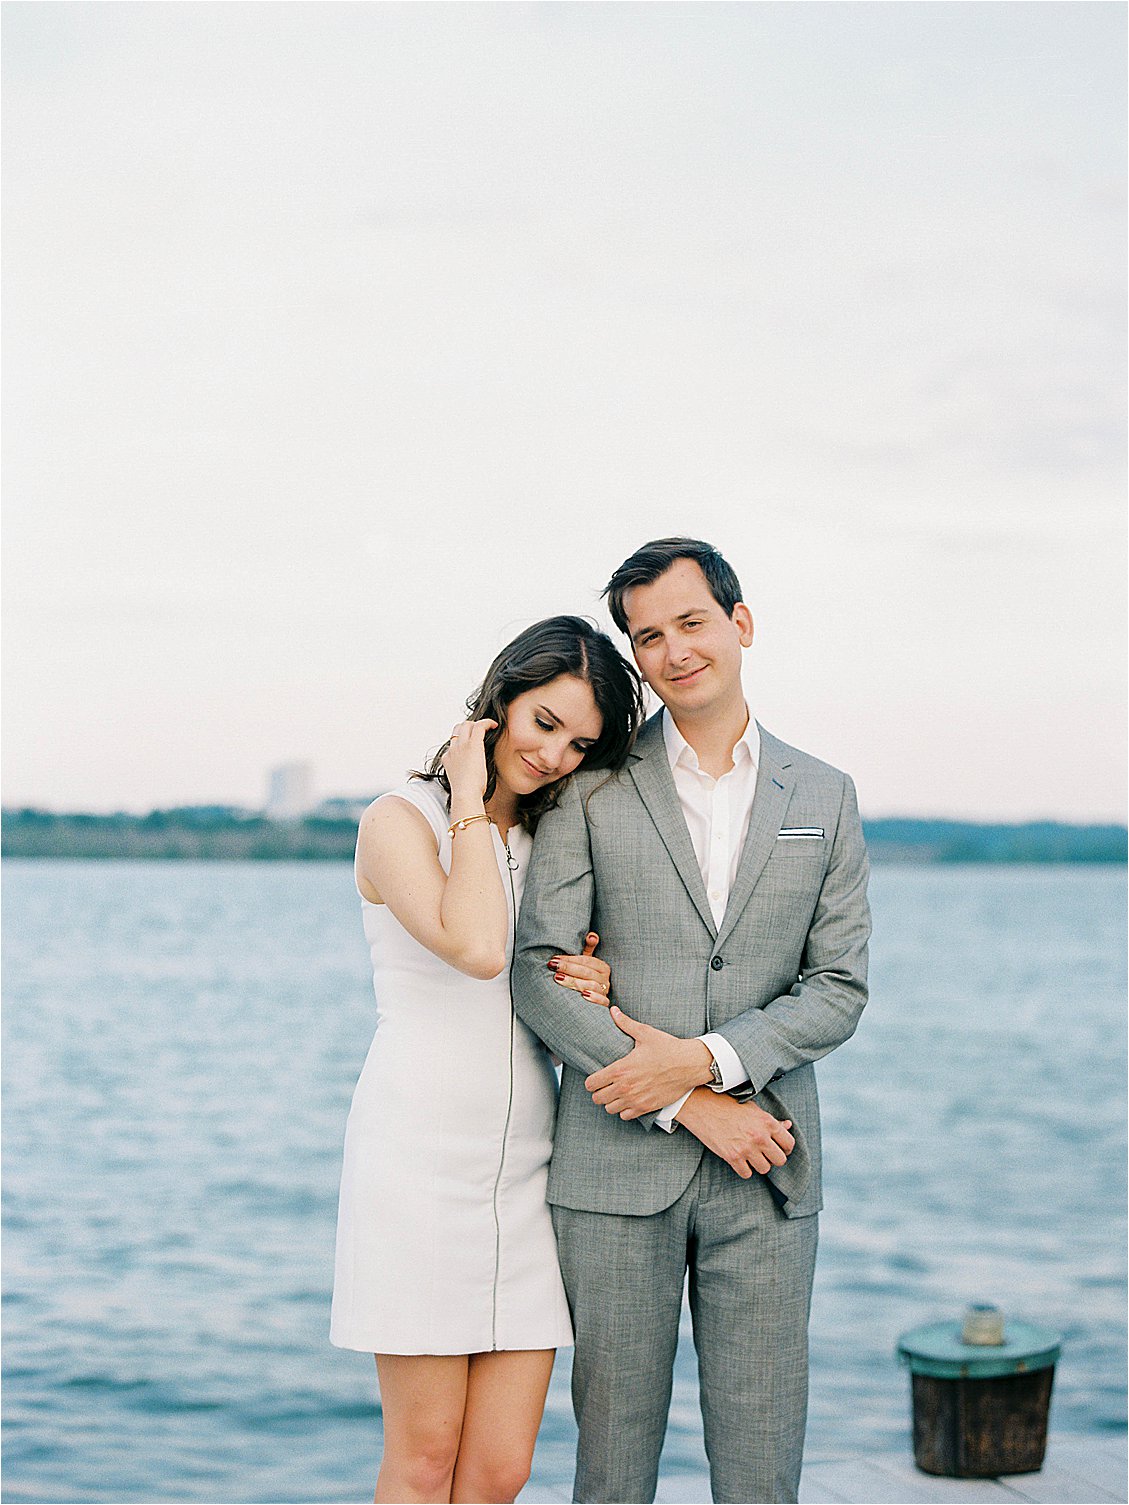 Waterfront Old Town engagement session with Virginia Film Wedding Photographer, Renee Hollingshead